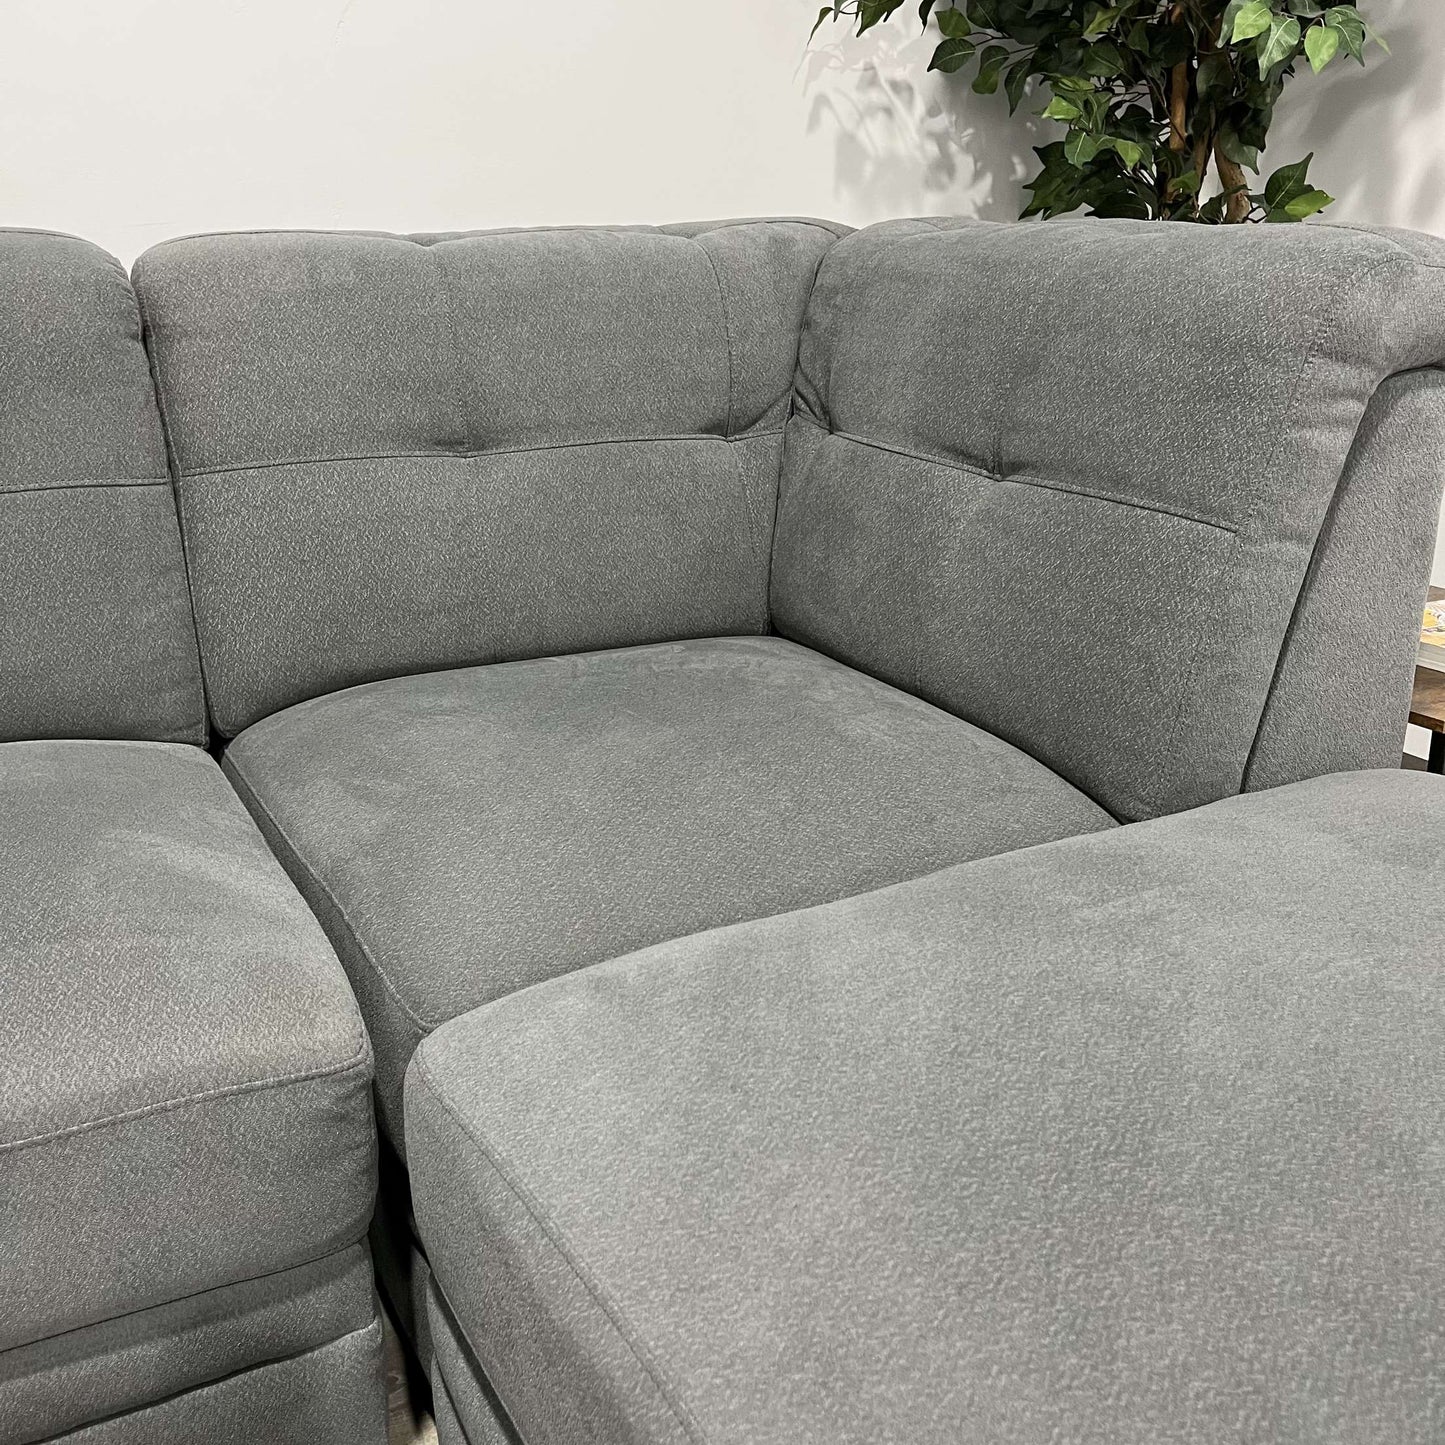 5 Piece Modular Sectional Couch (Costco)